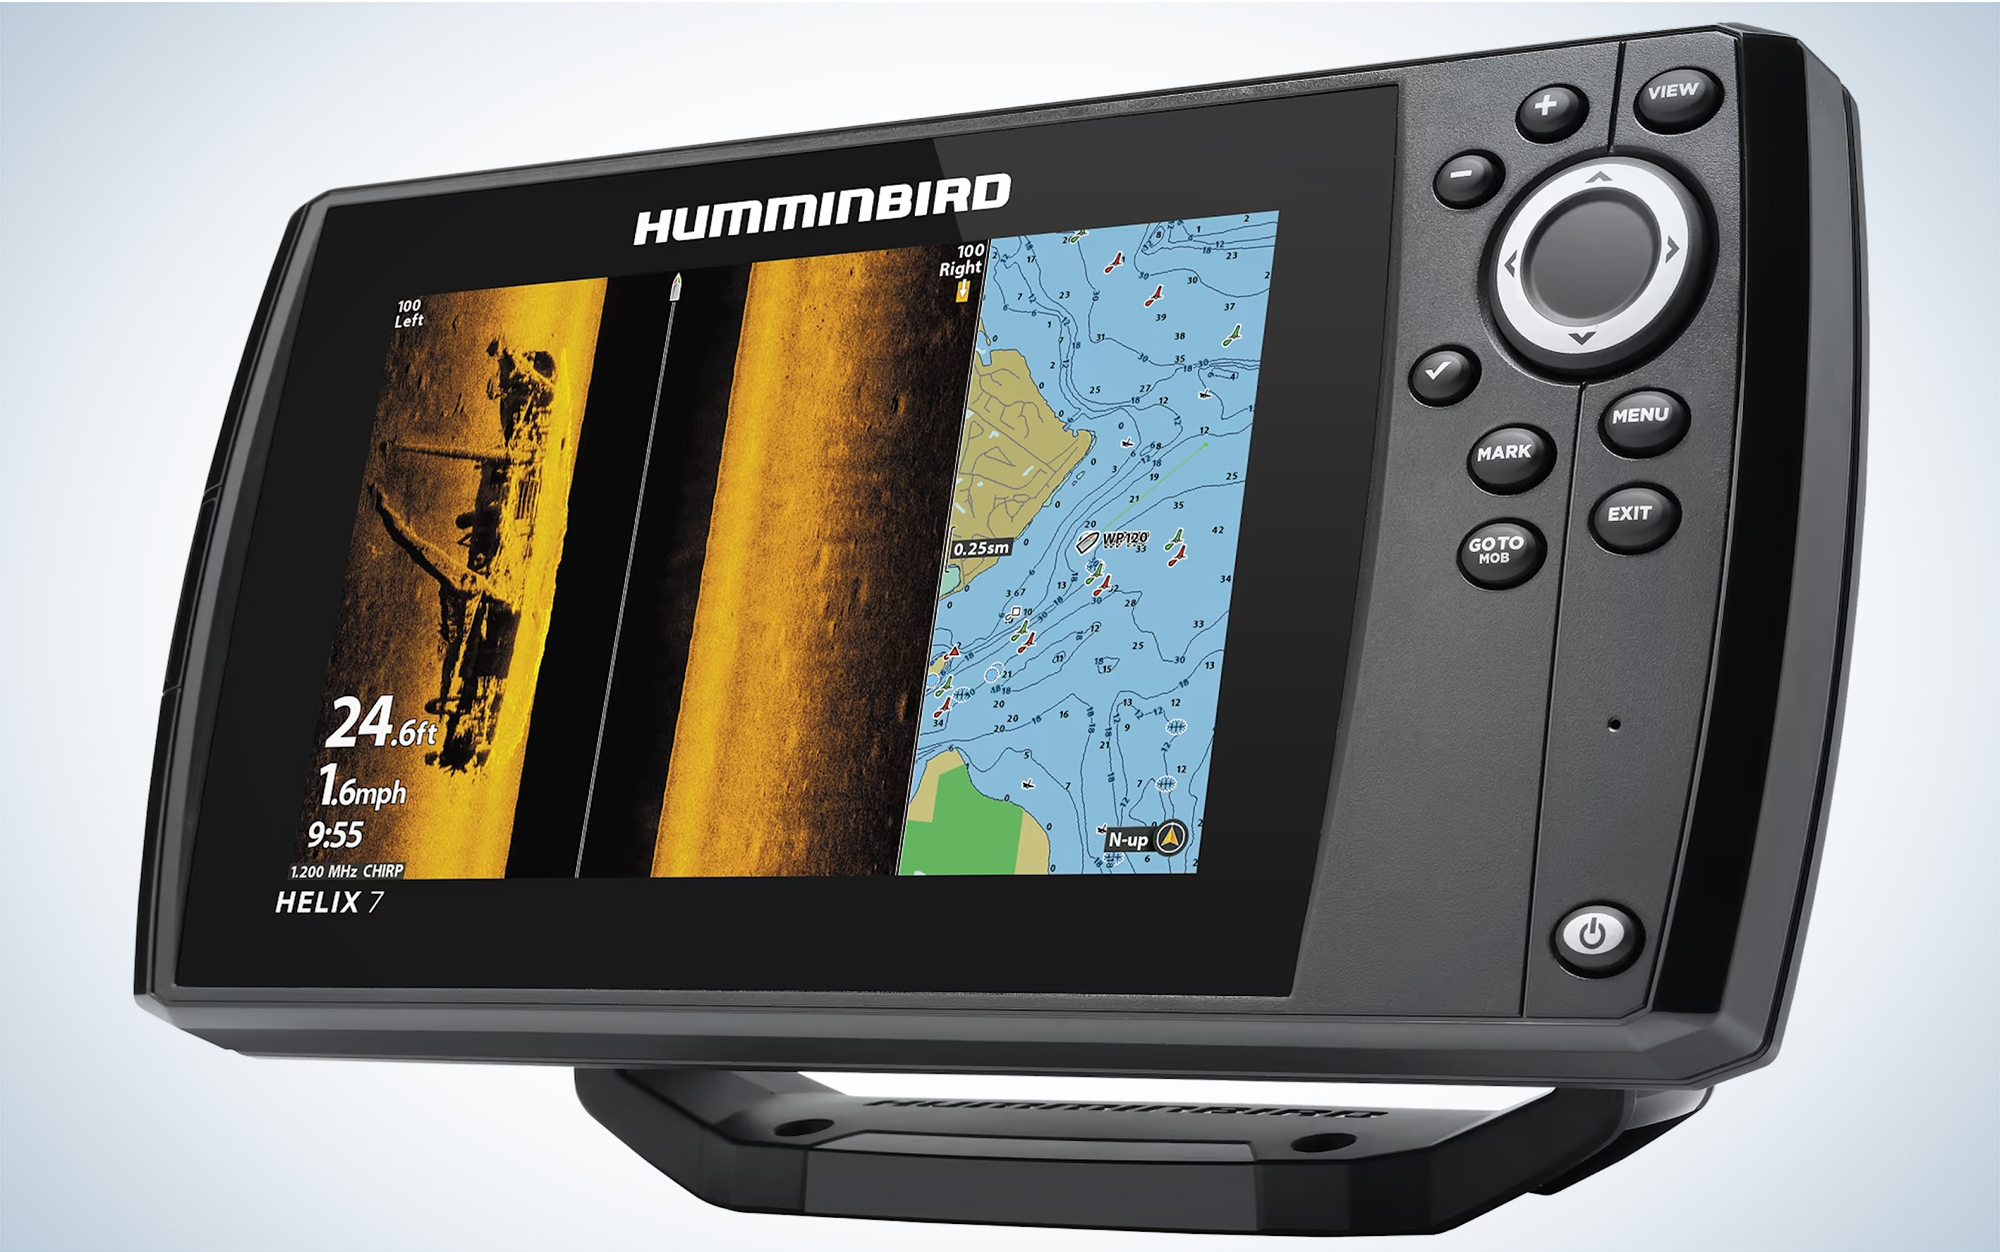 The Humminbird Helix 7 is the best GPS for anglers.